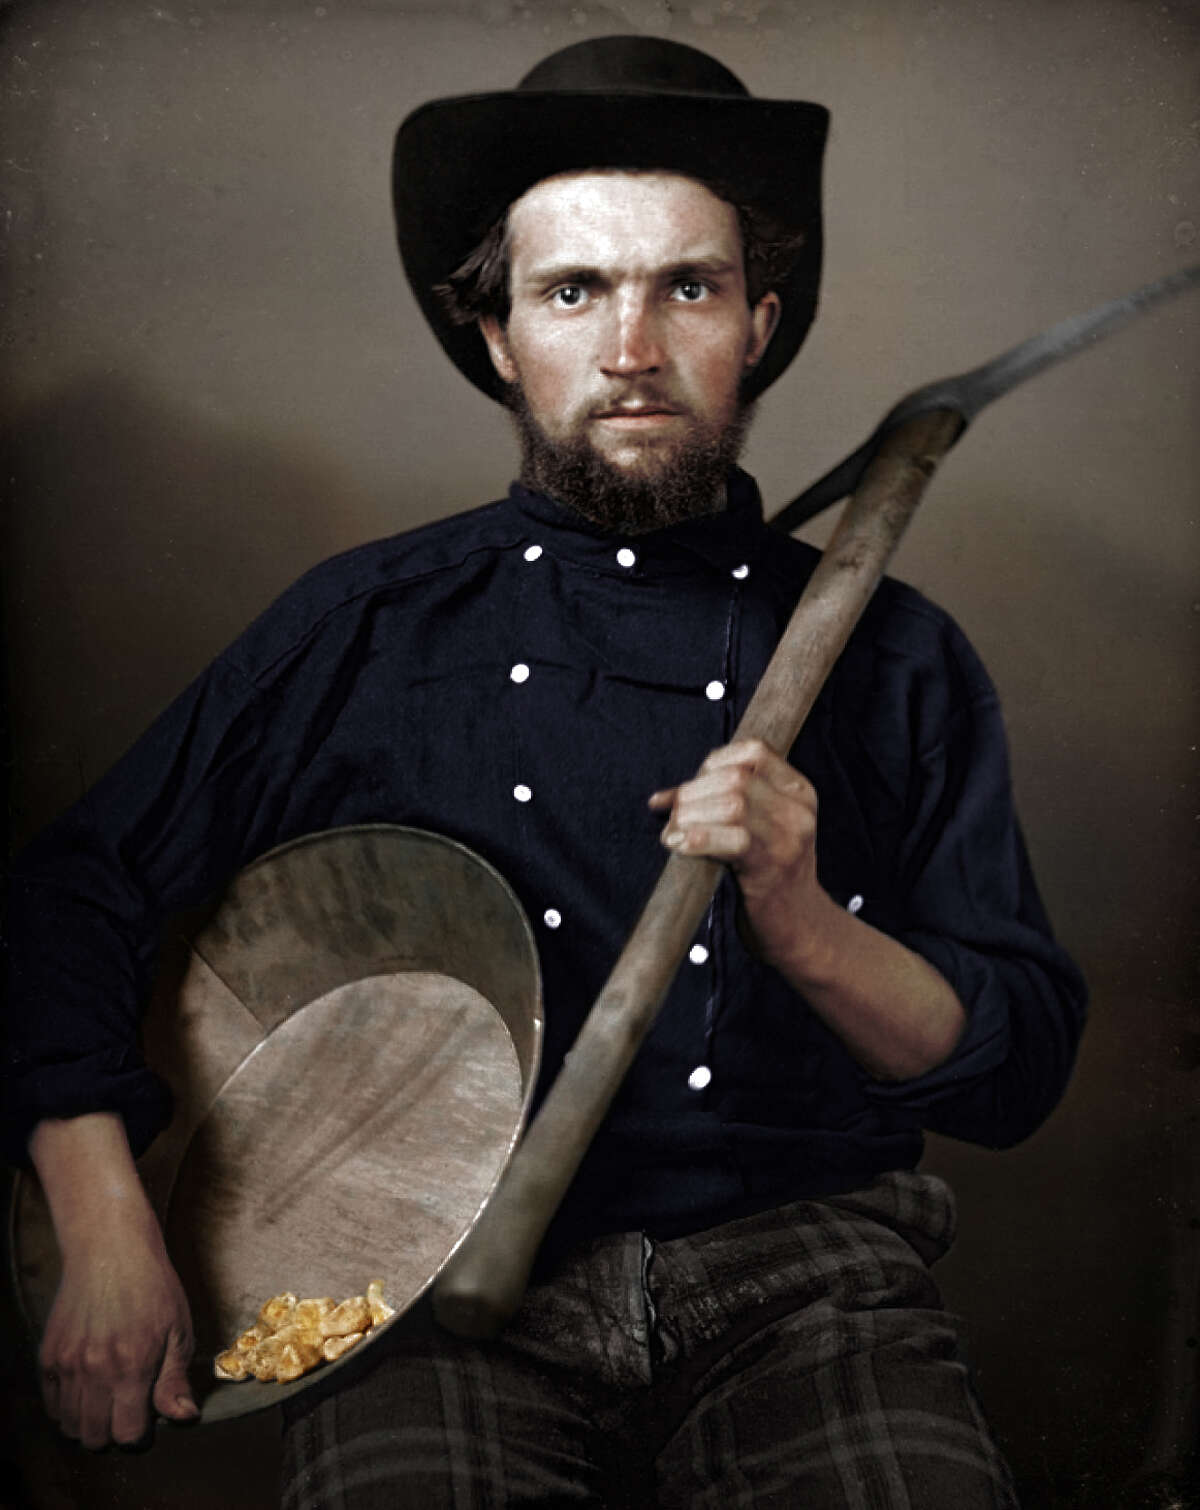 Matt Loughrey and Sarah McWalter, of "My Colorful Past," colorized daguerrotypes made during the California Gold Rush. The images were taken around 1850.